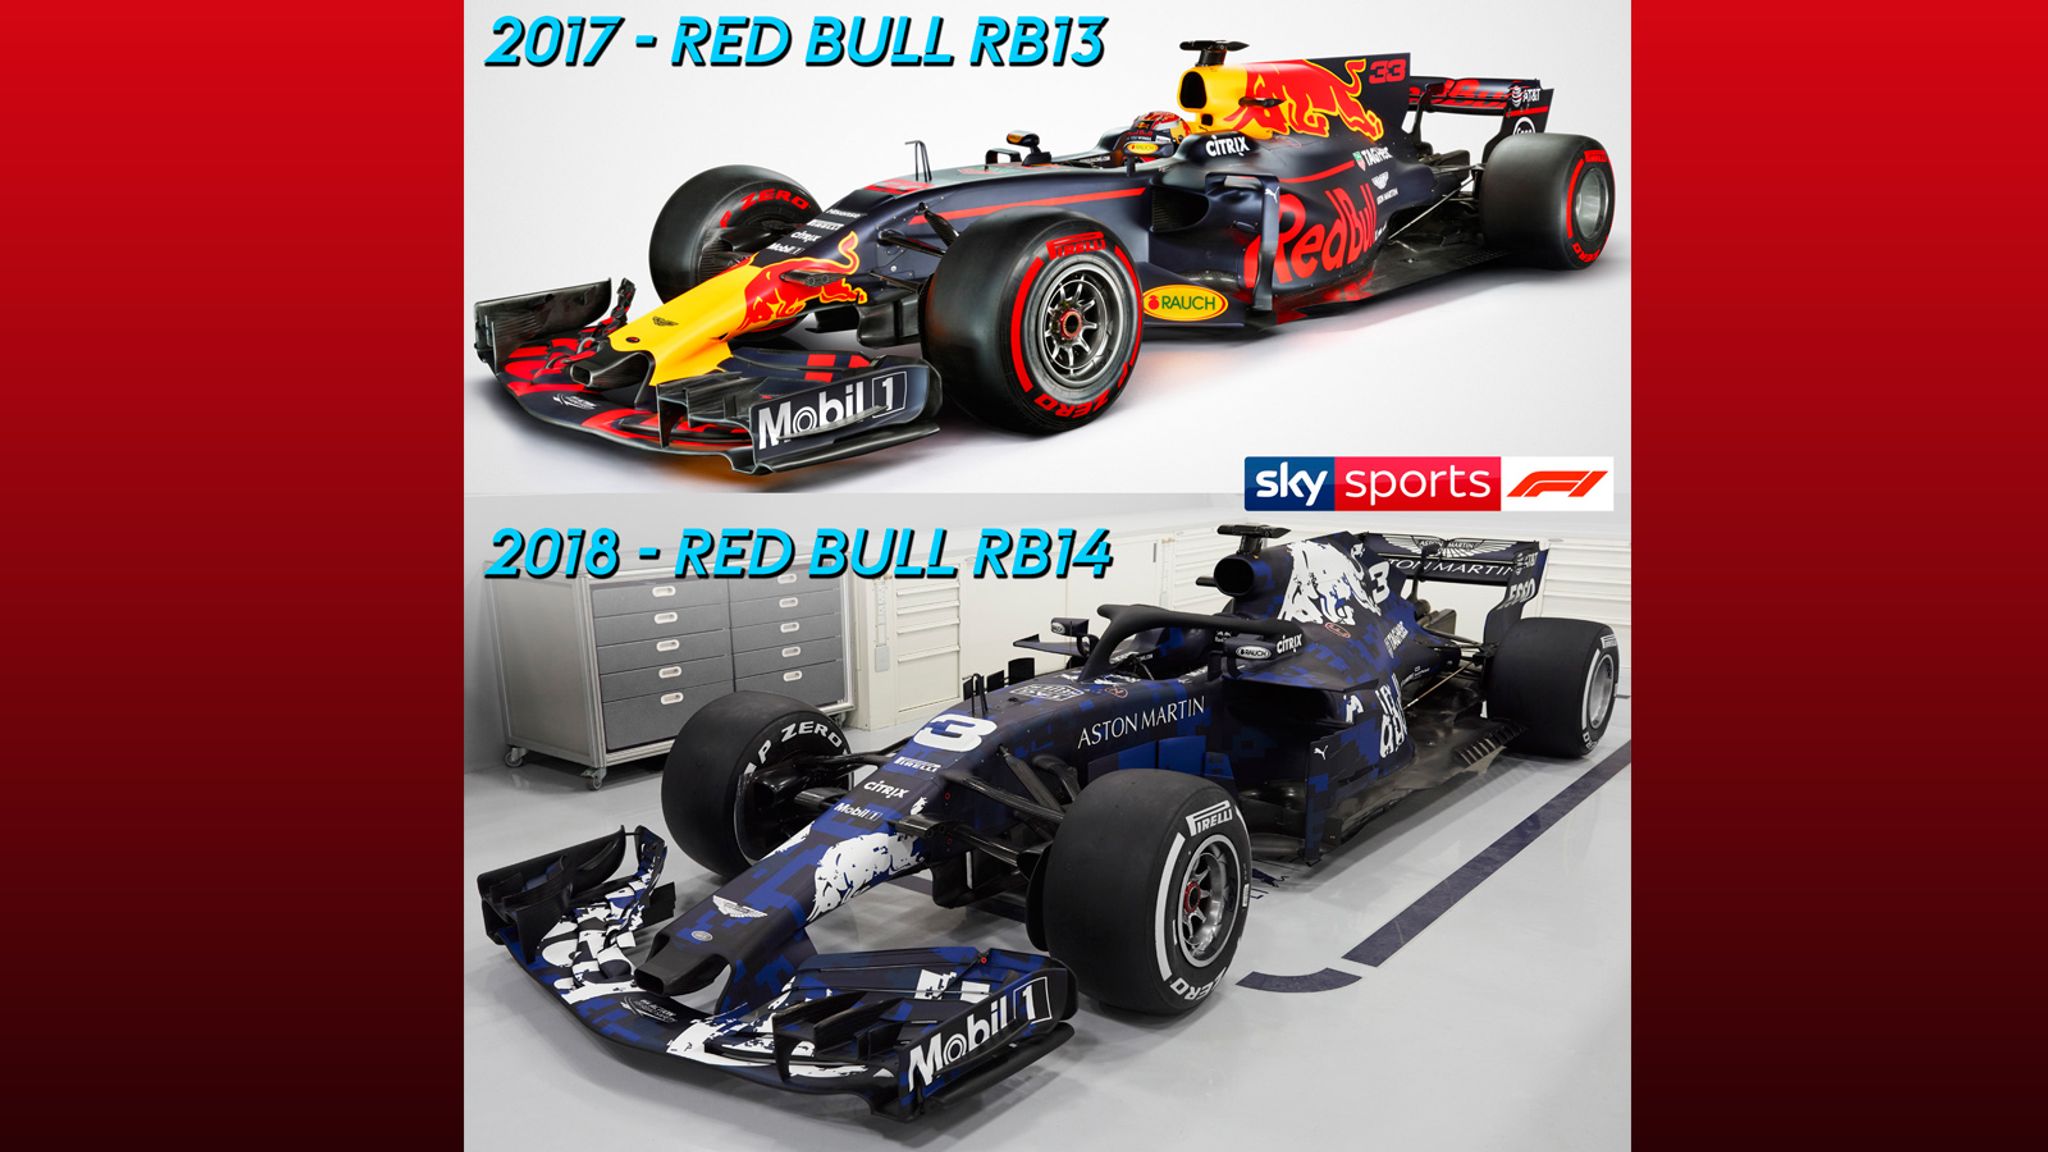 Red Bull Rb14 Hits The Track For The First Time At Silverstone F1 News